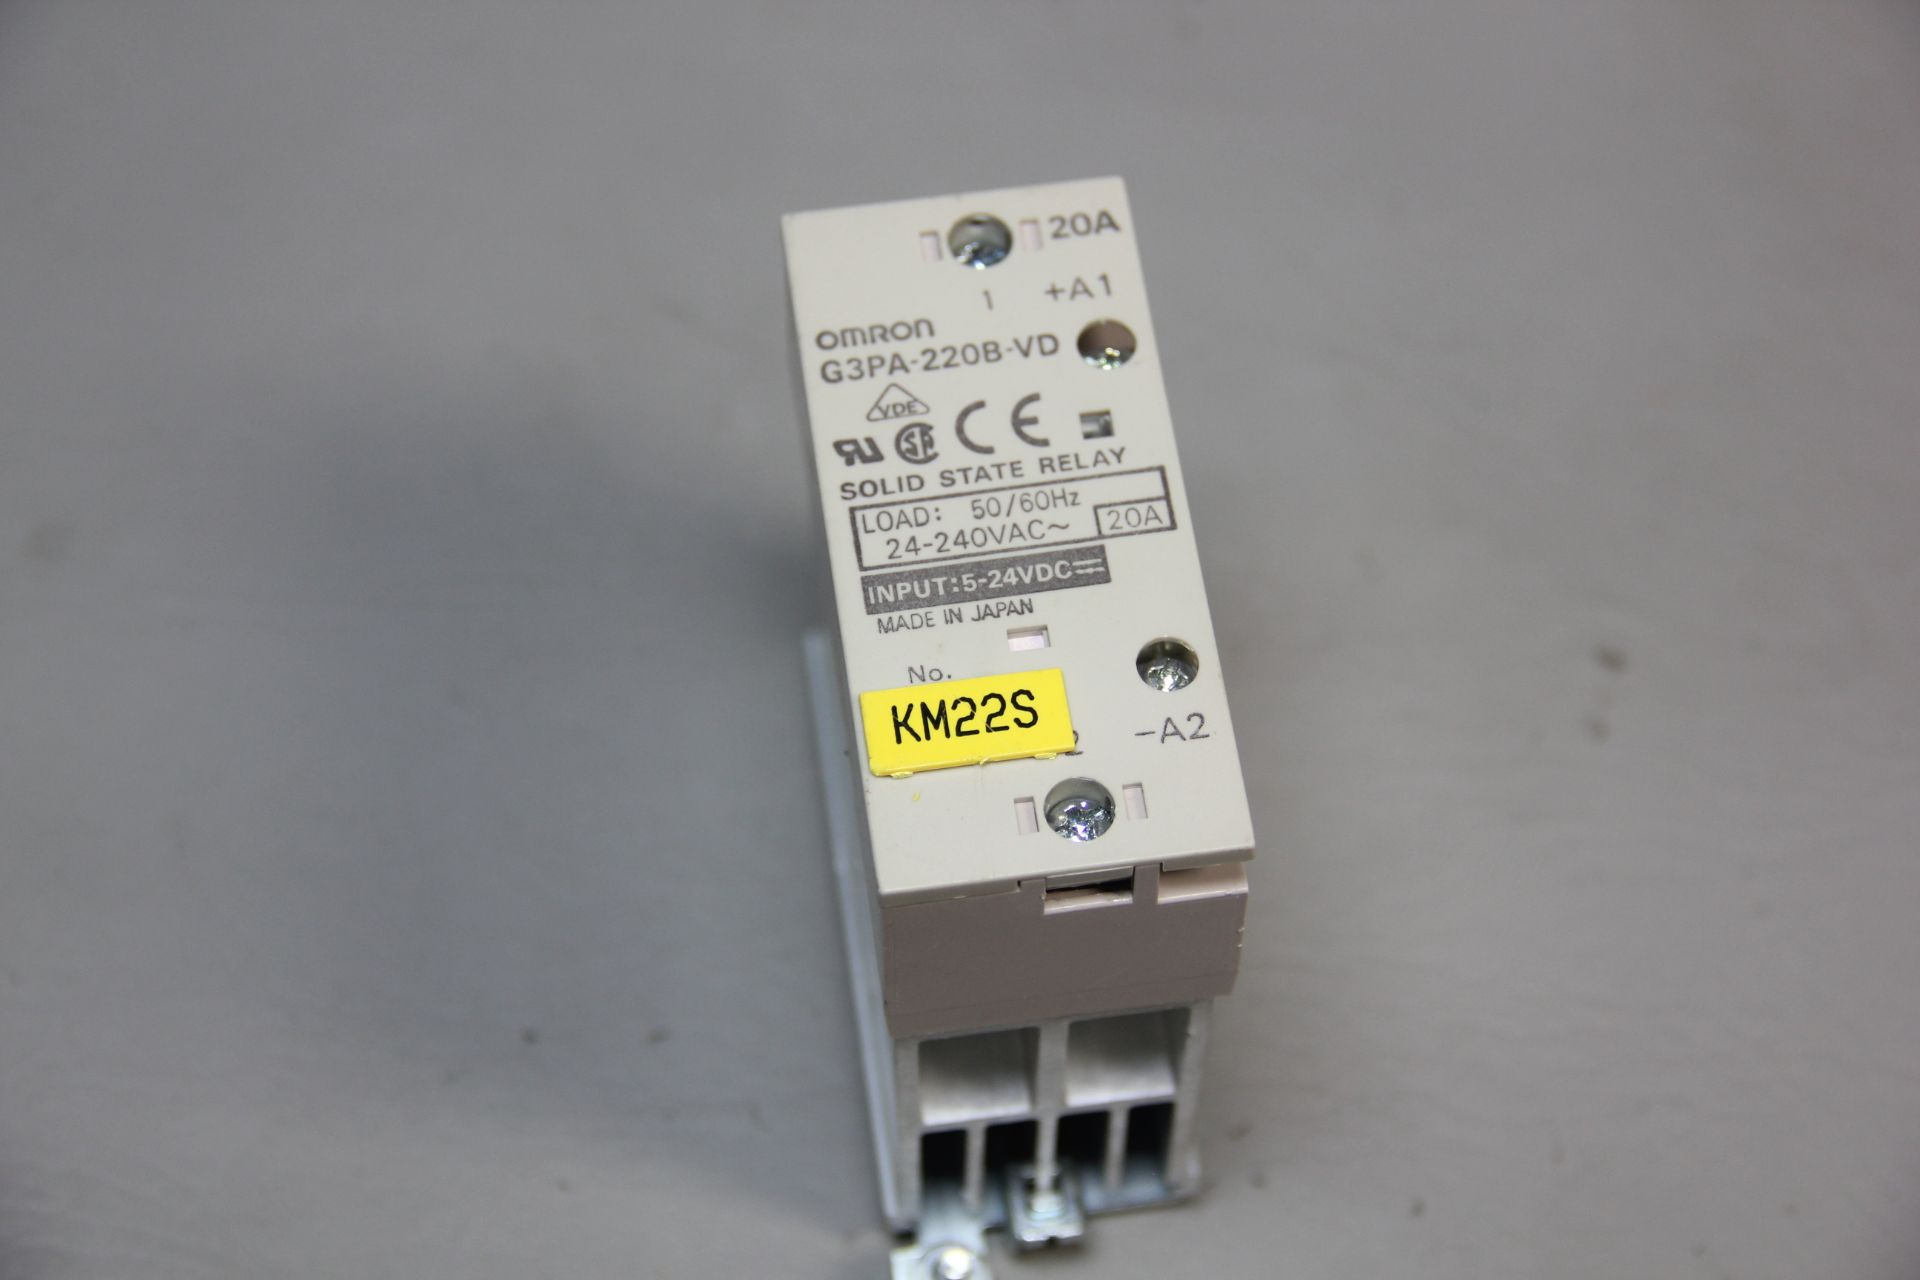 OMRON SOLID STATE RELAY G3PA-220B-VD